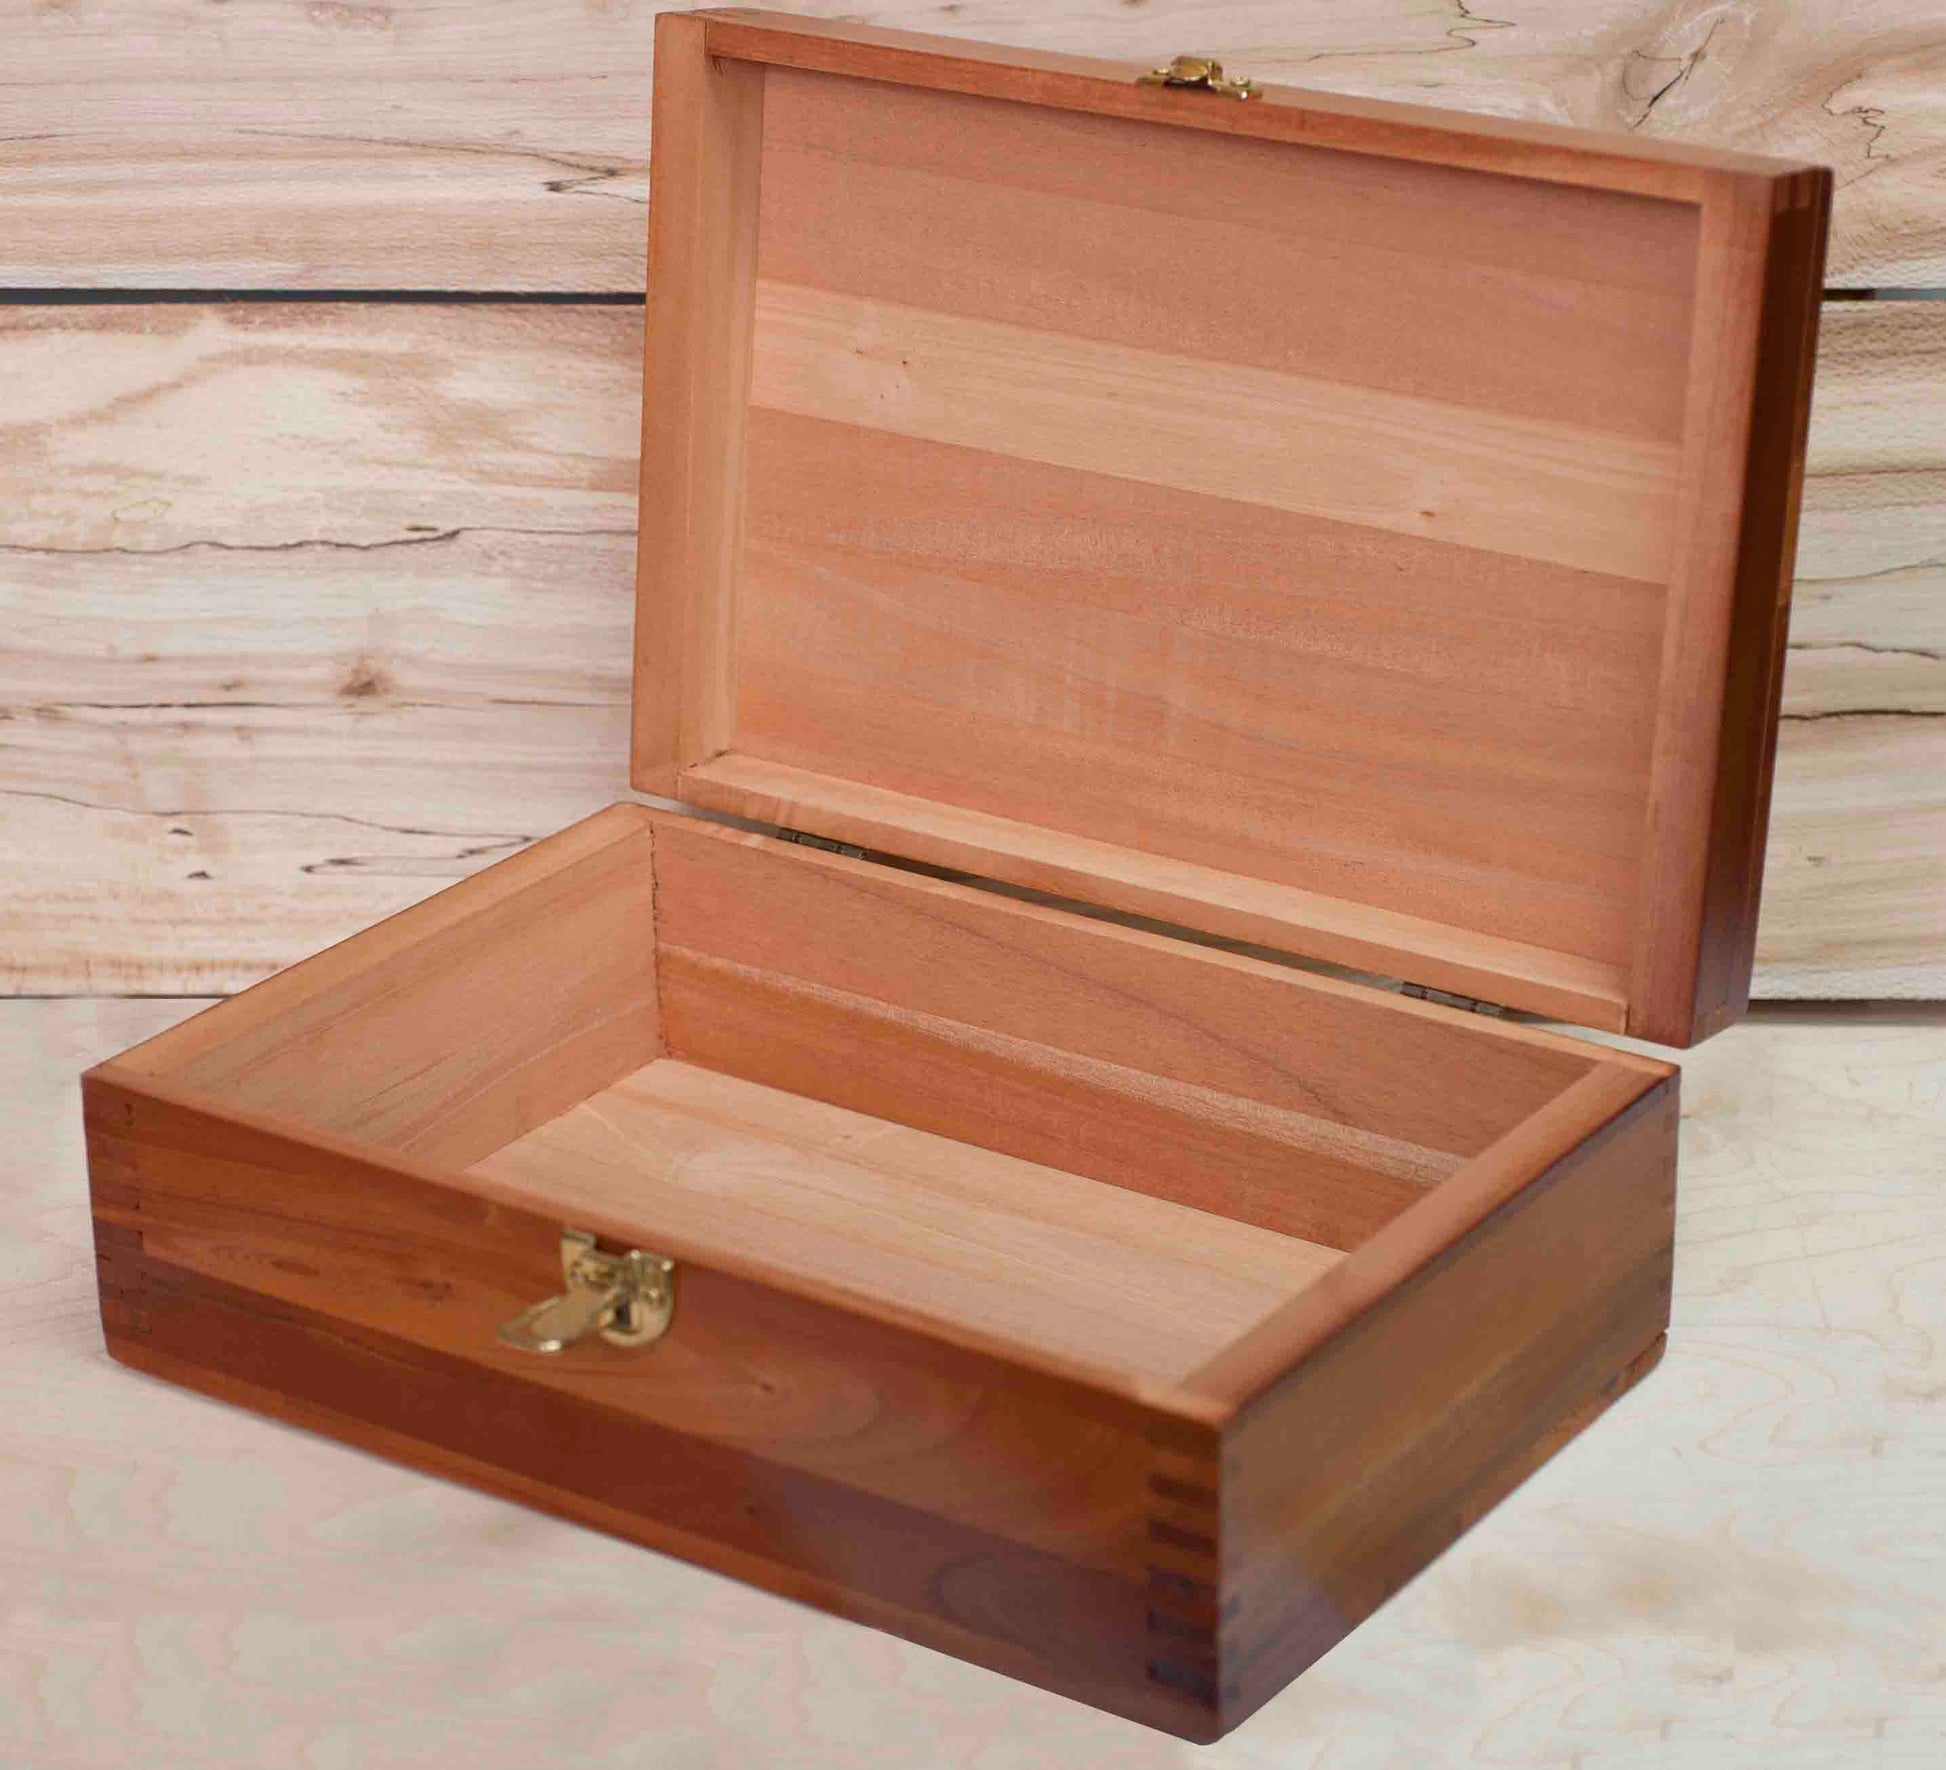 Open Cedar Box | Memory Box | Wooden Box with Hinged Lid